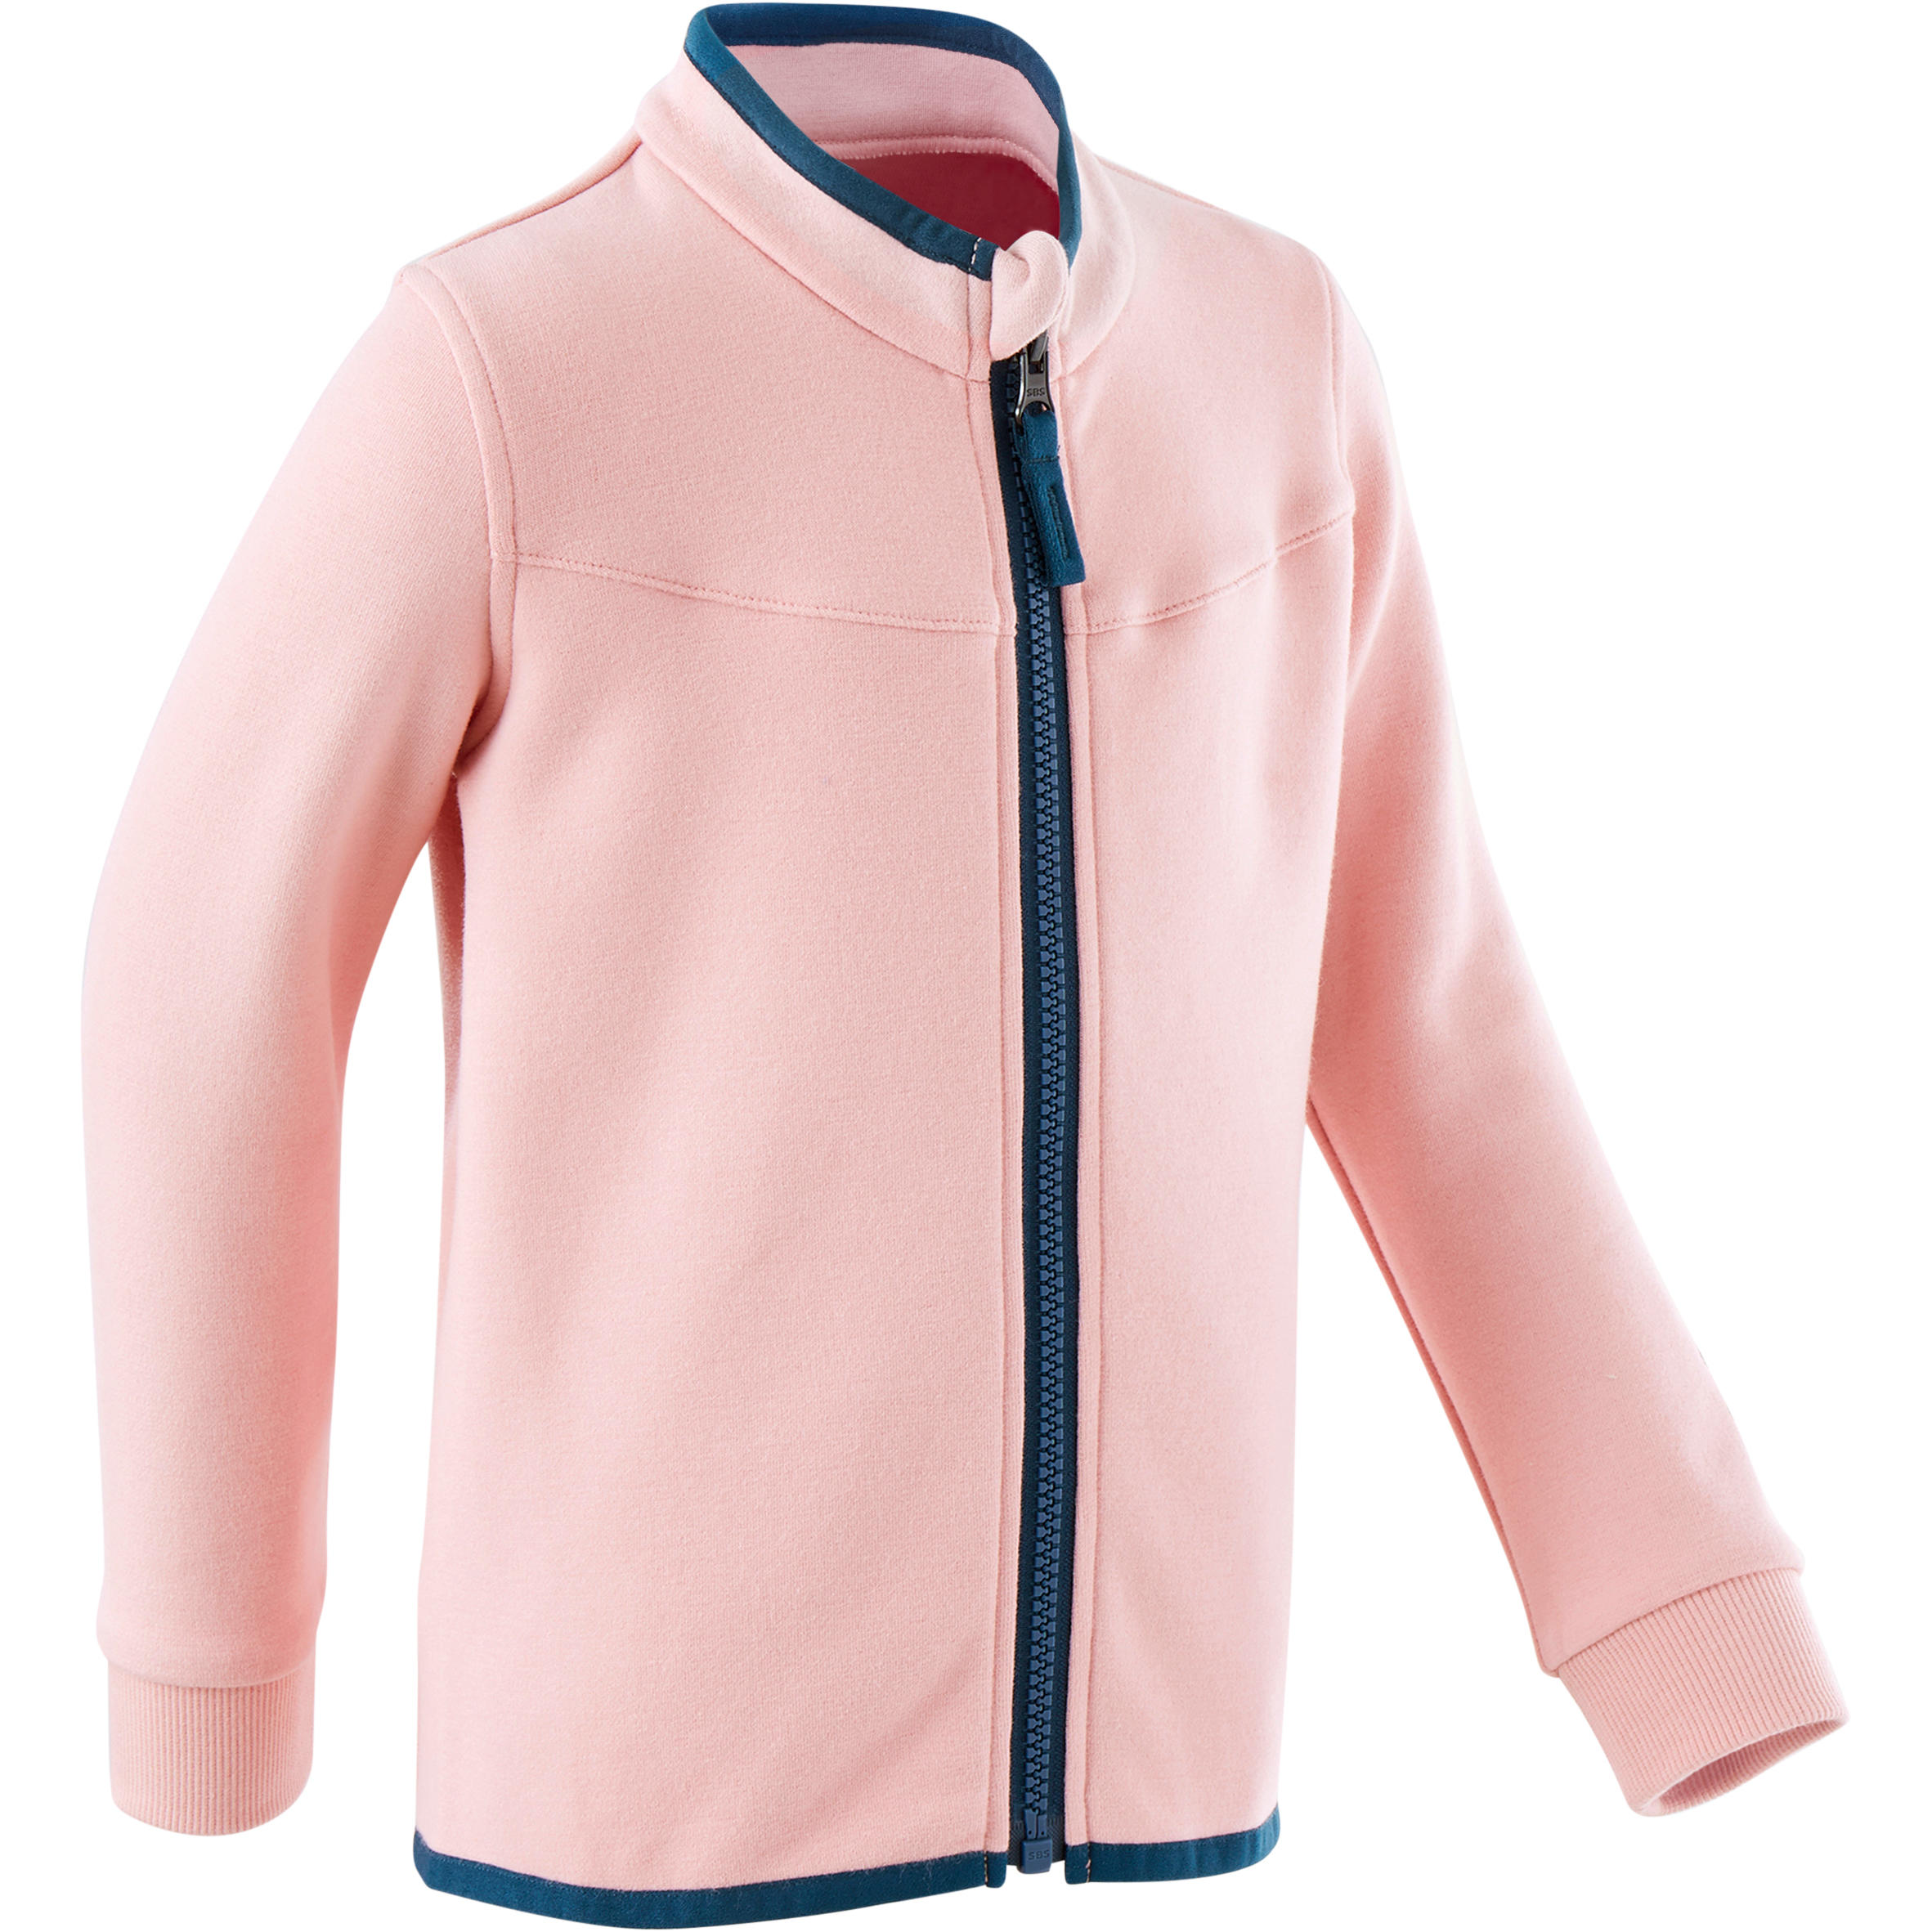 Girls' and Boys' Baby Gym Jacket 500 